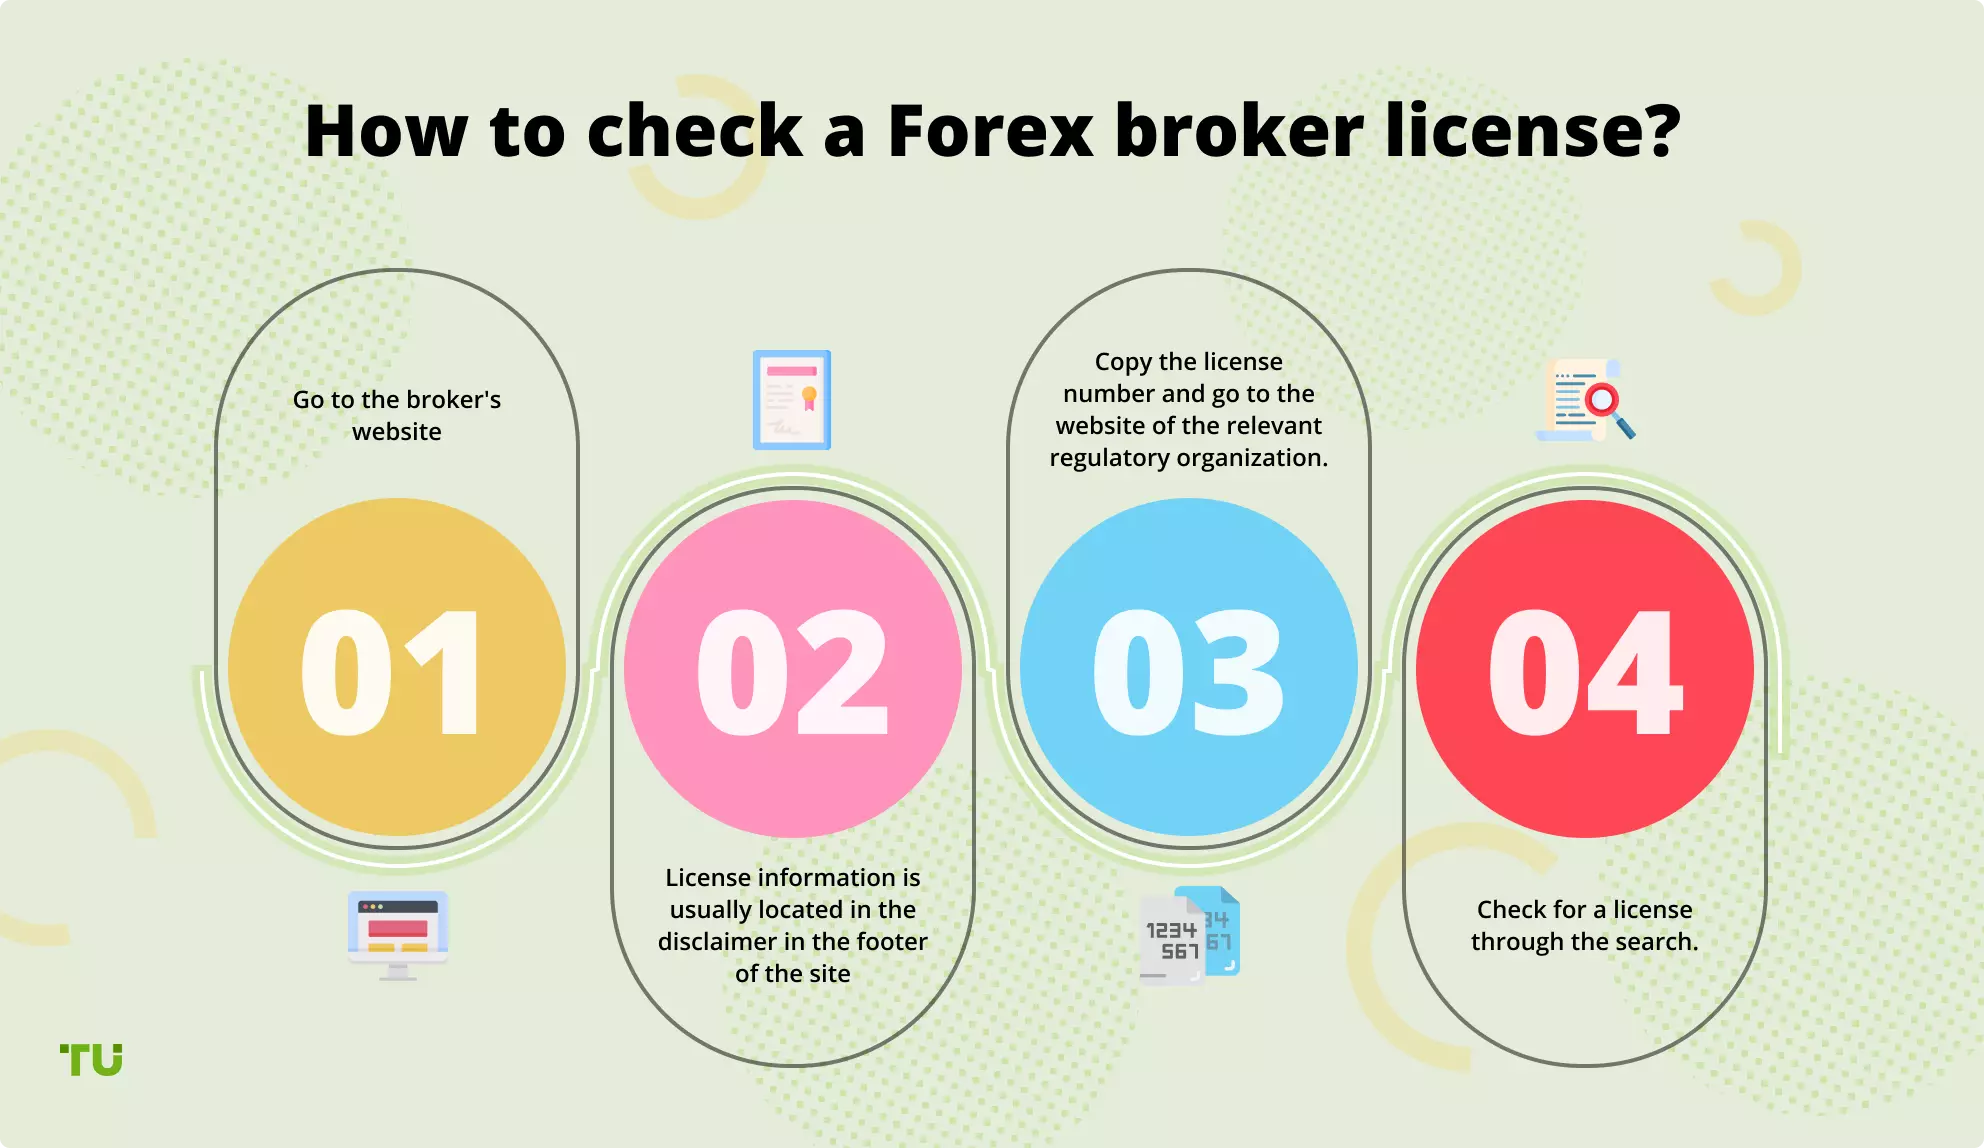 How to check a Forex broker license?